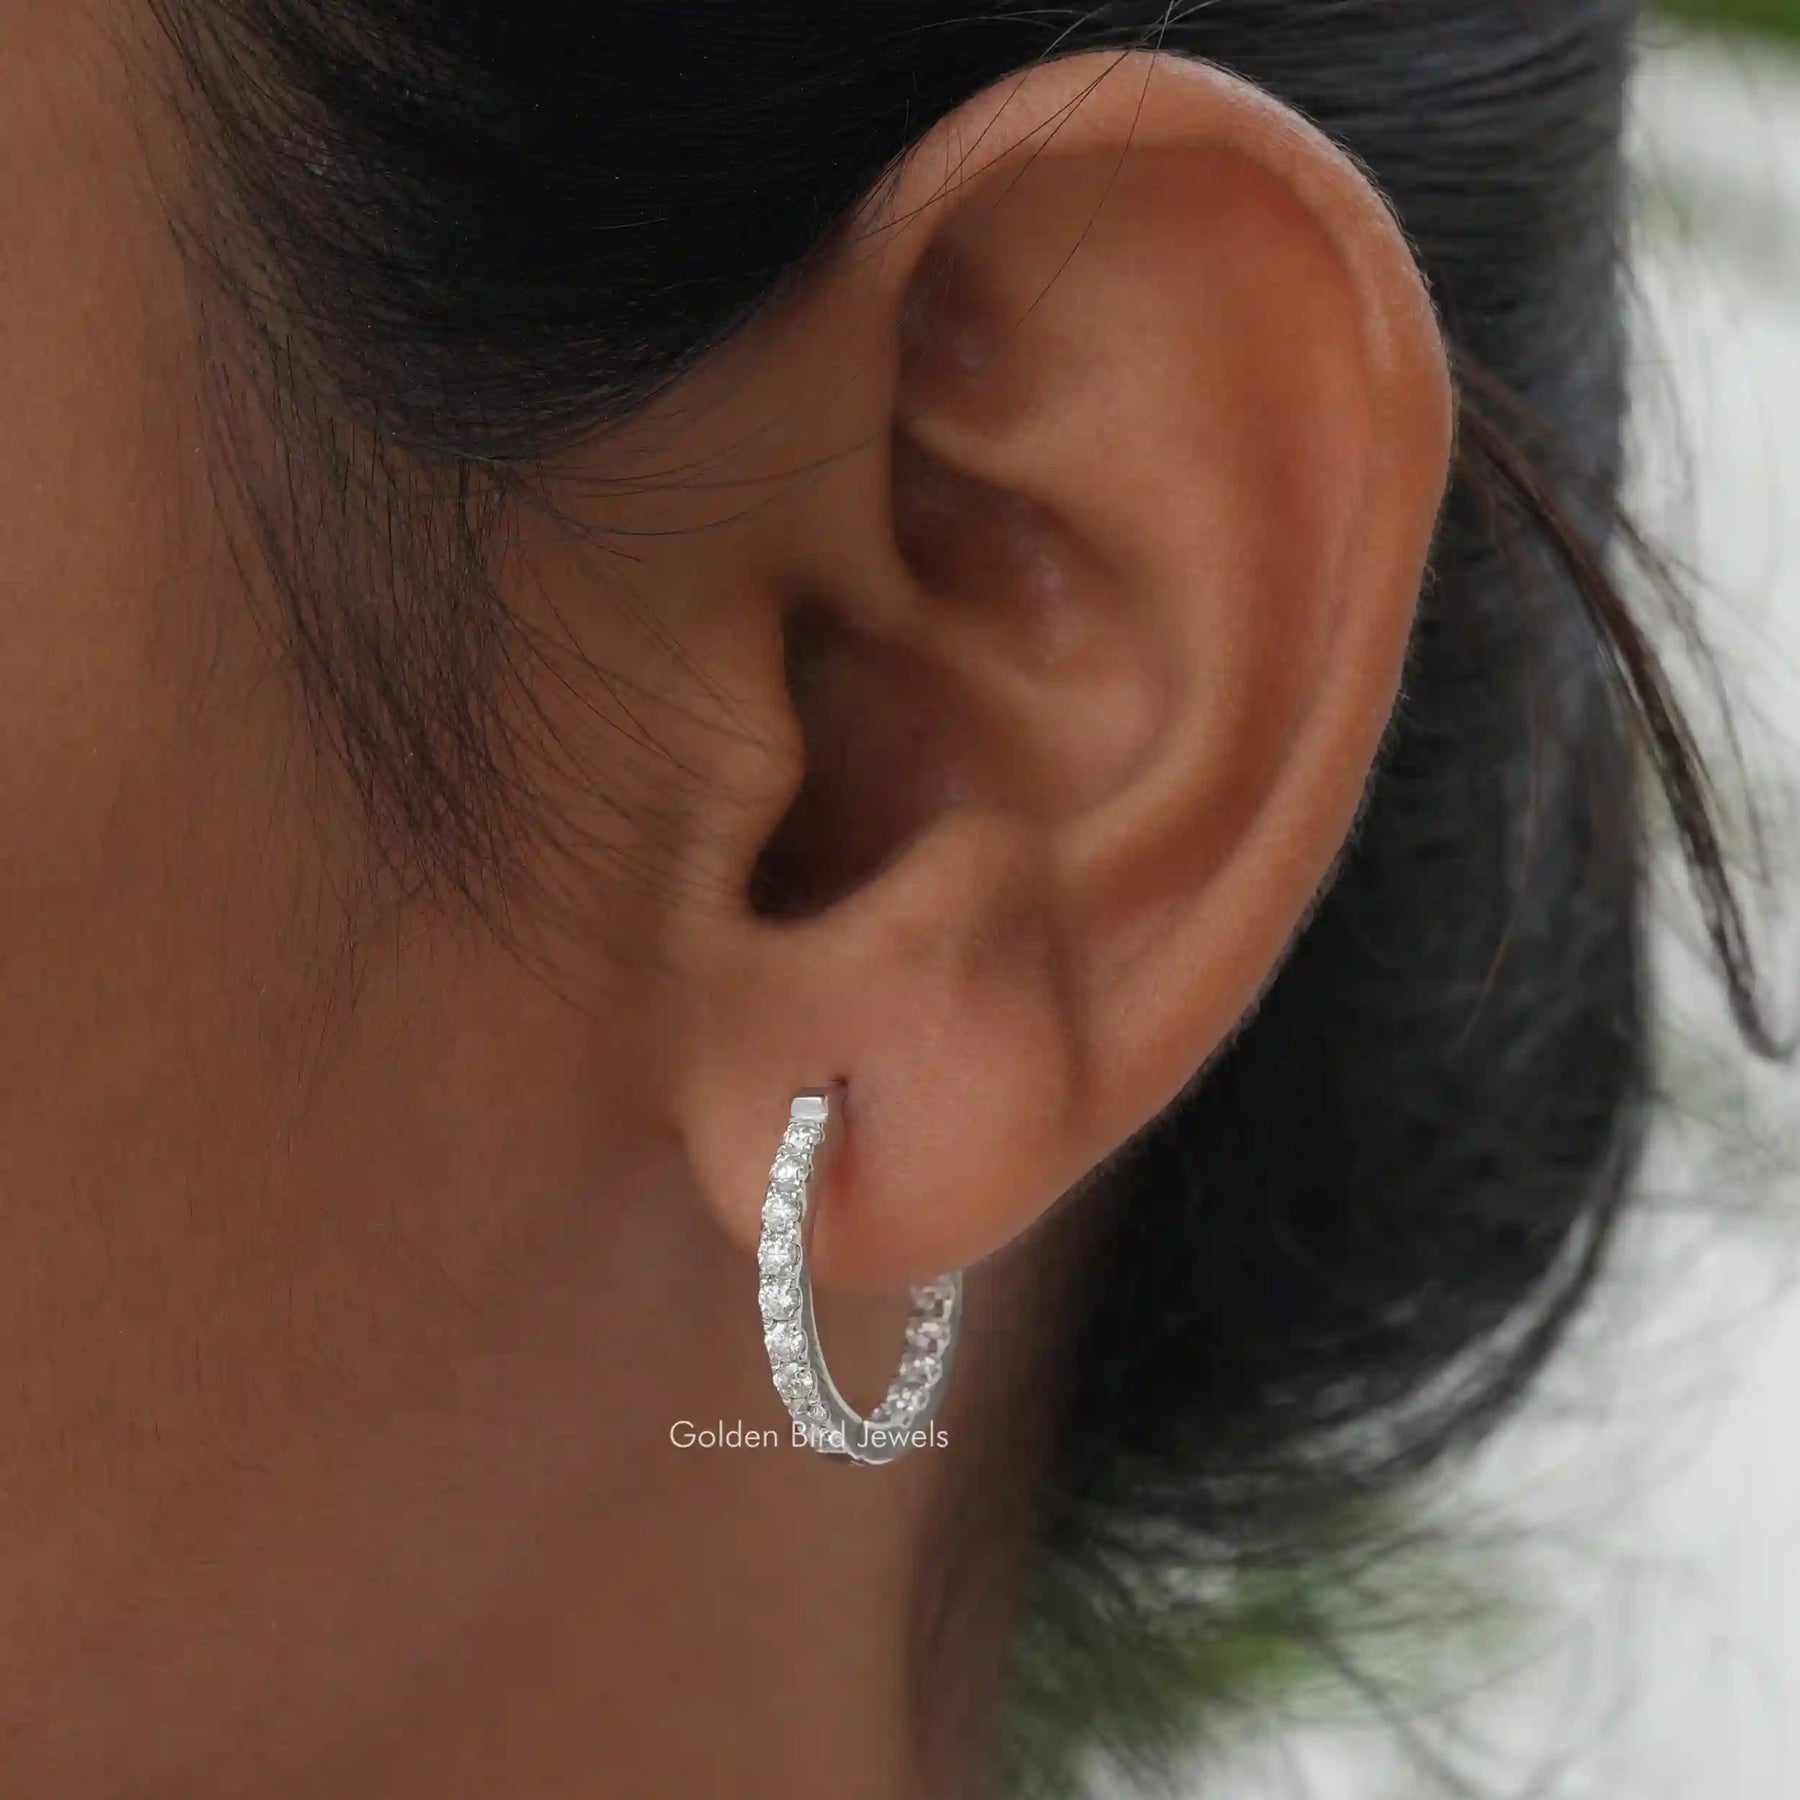 [In ear front view of round cut moissanite earrings]-[Golden Bird Jewels]